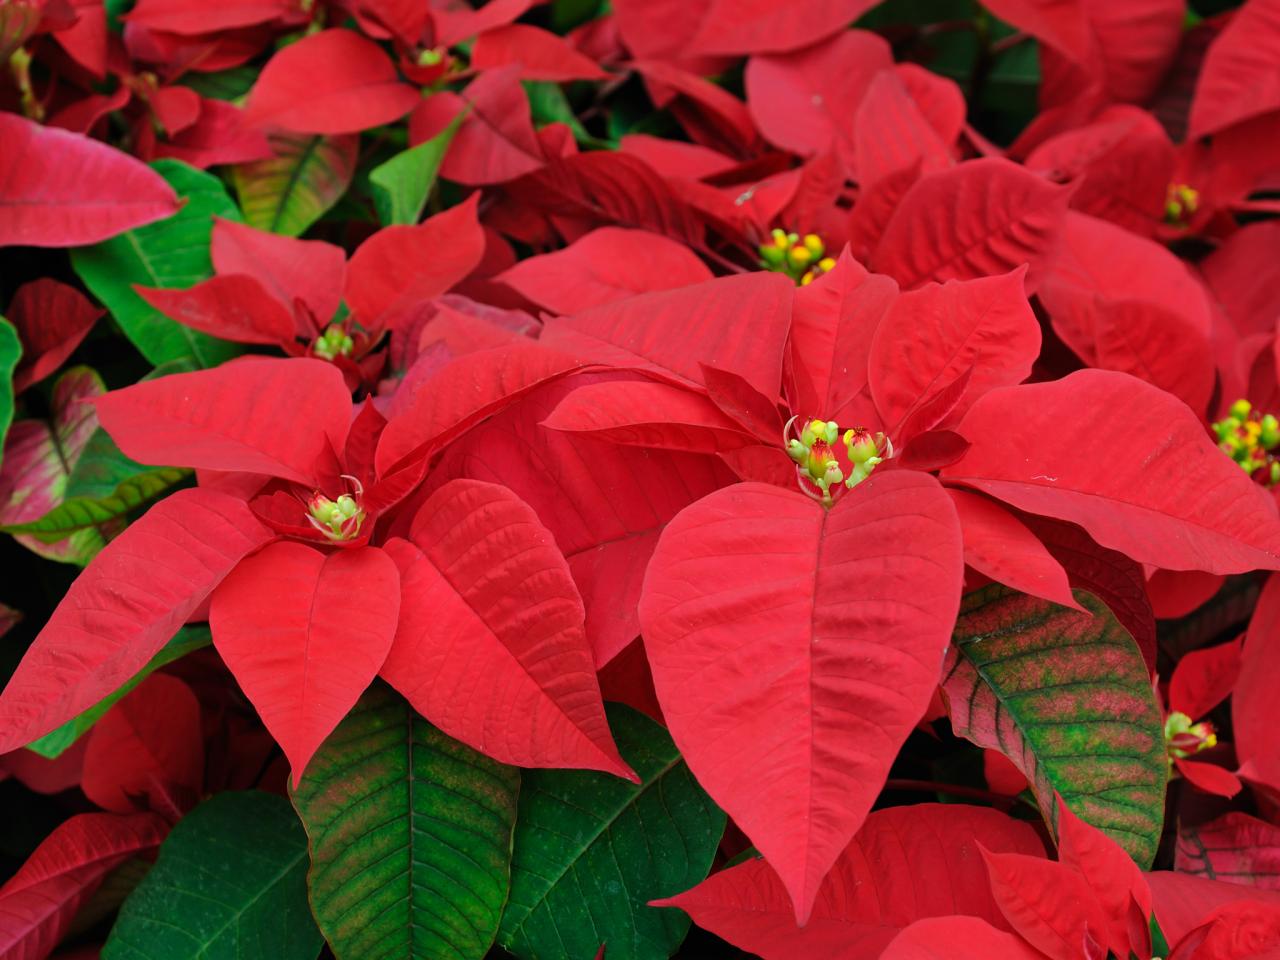 The Holidays are over… Now what do I do with this Poinsettia?!